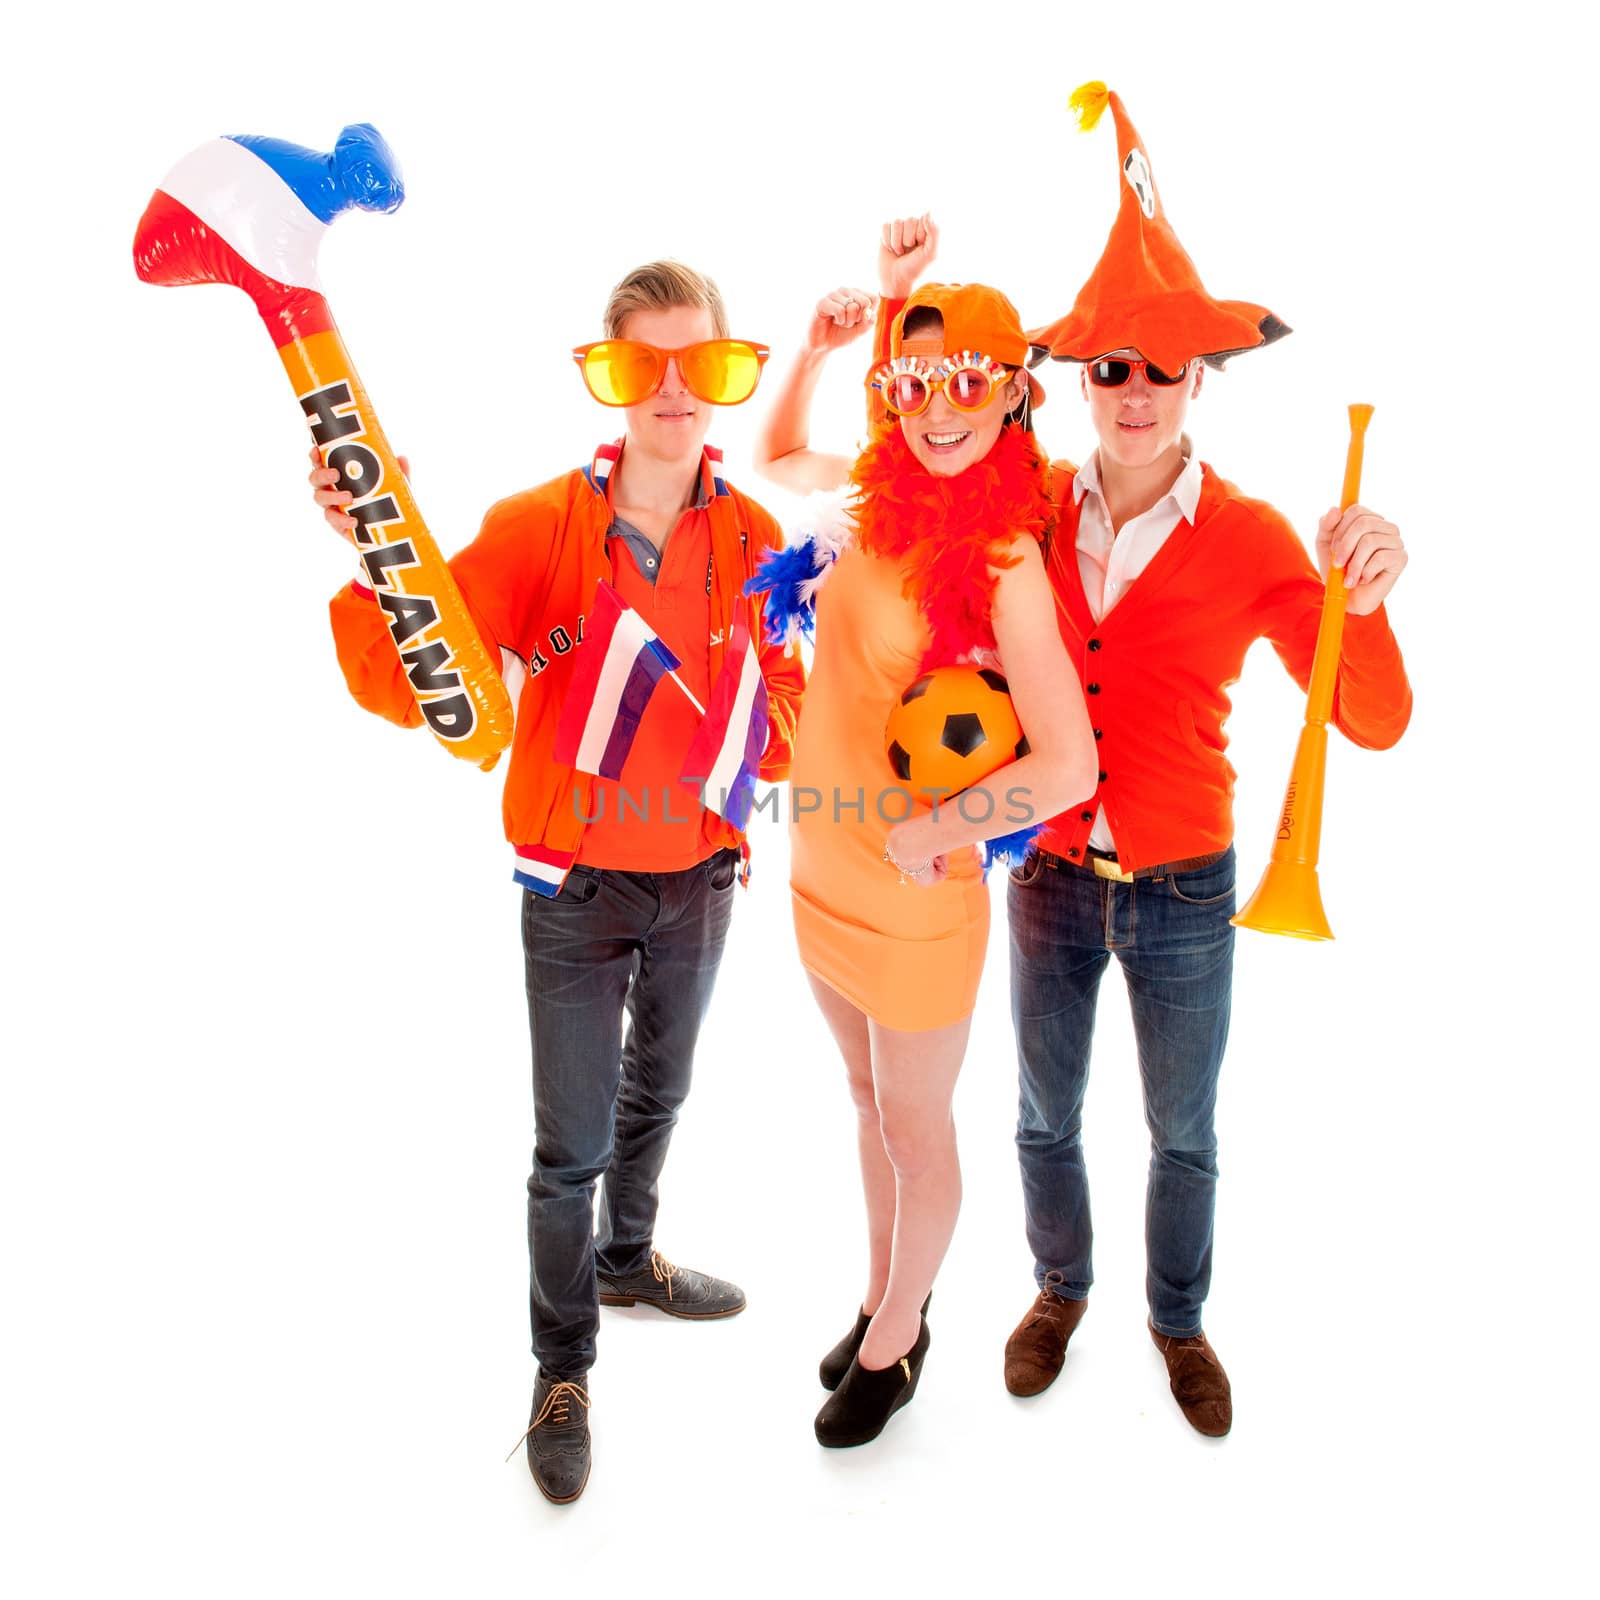 two boys and a girl, the supporters of the dutch soccerteam.